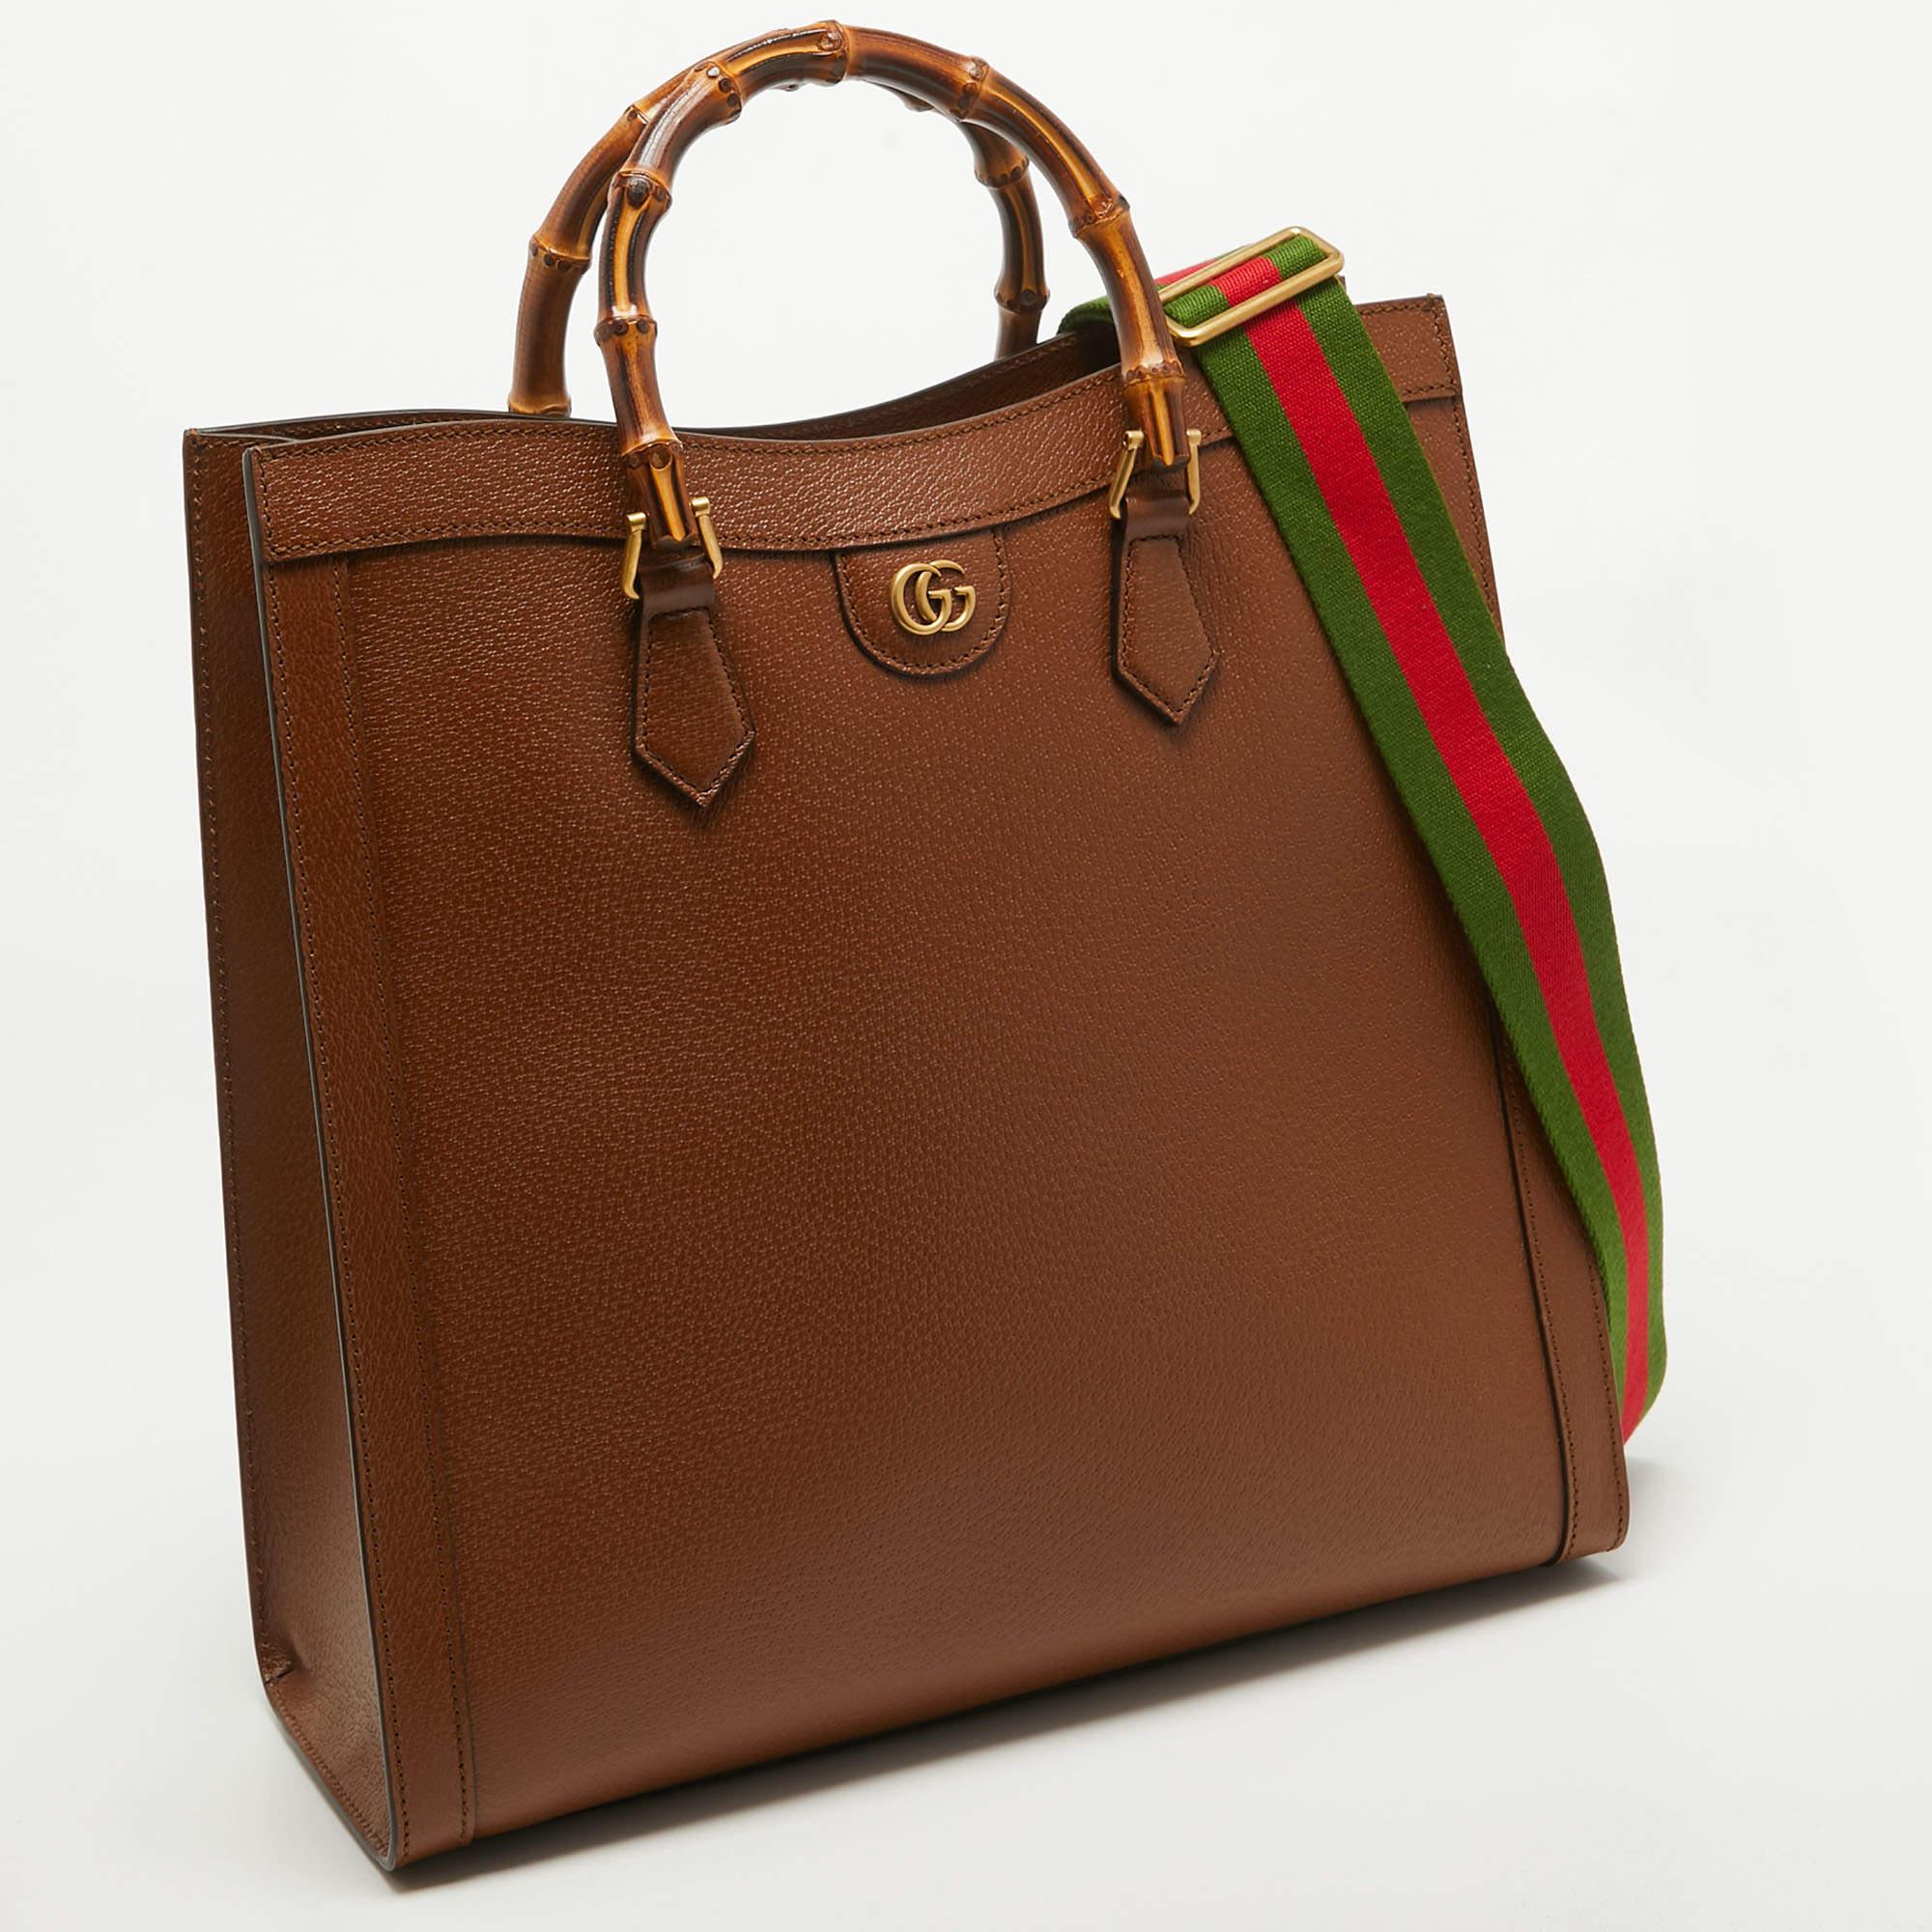 Gucci Brown Leather Large Bamboo Diana Tote In Excellent Condition For Sale In Dubai, Al Qouz 2